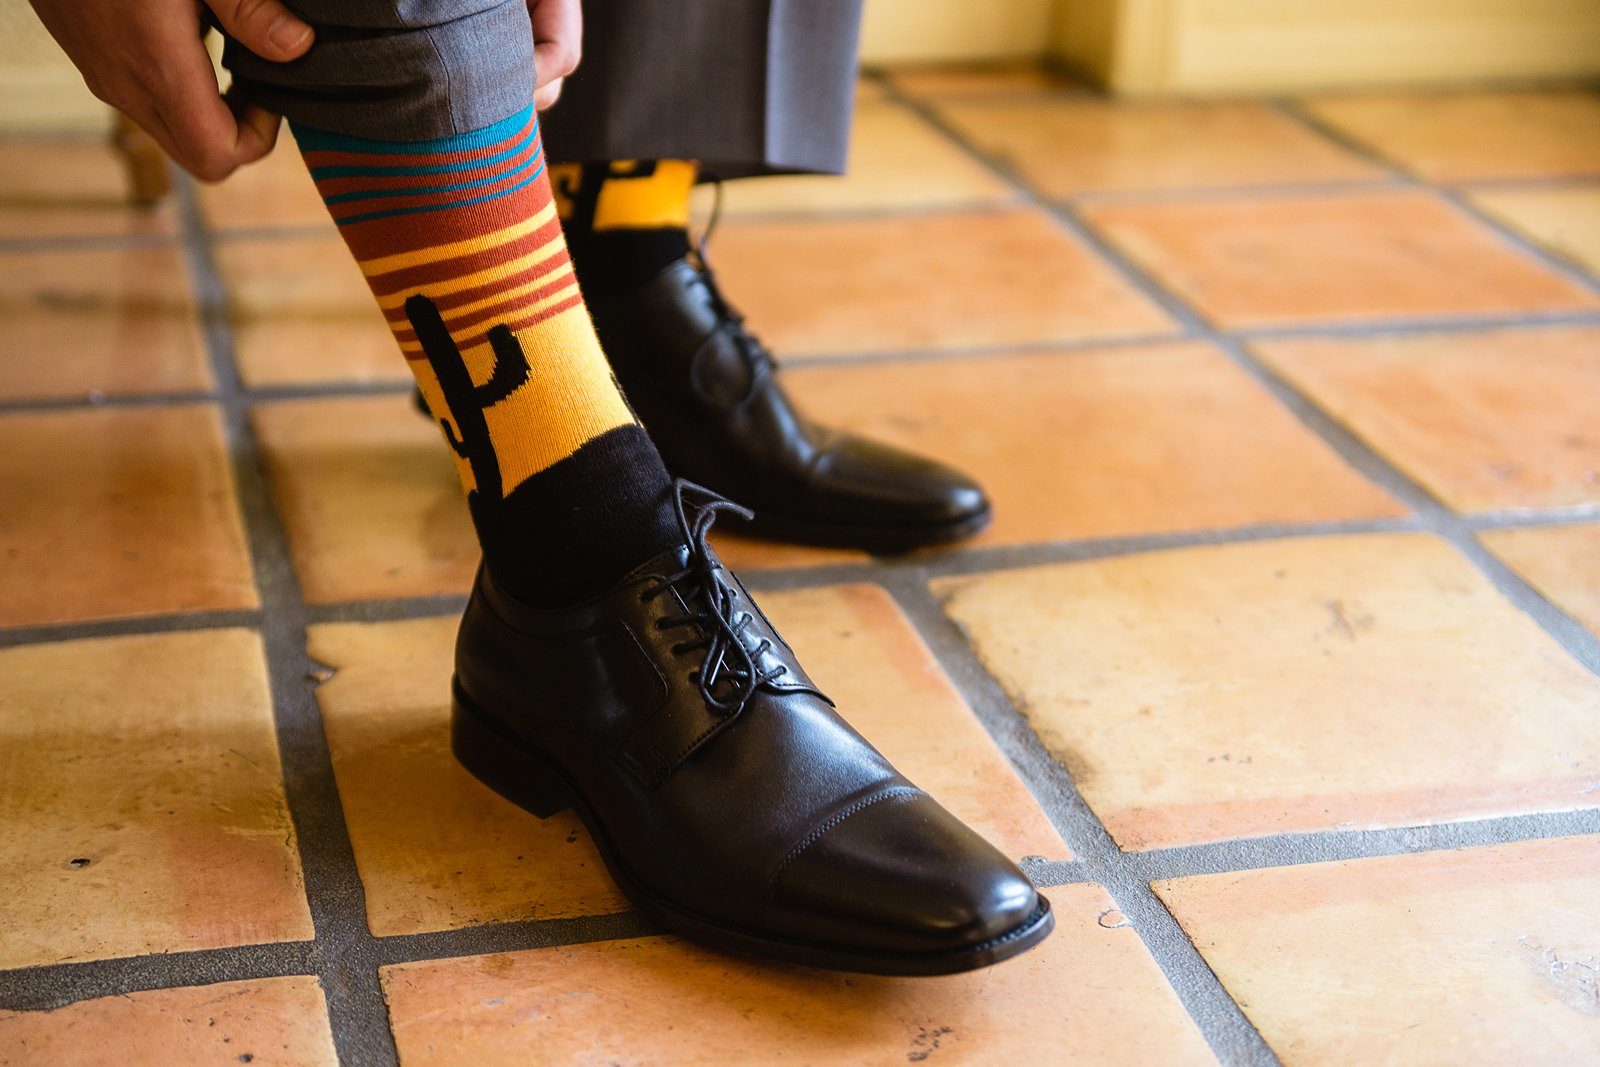 Groom's sunset cactus desert socks under his wedding day suit by PMA Photography.